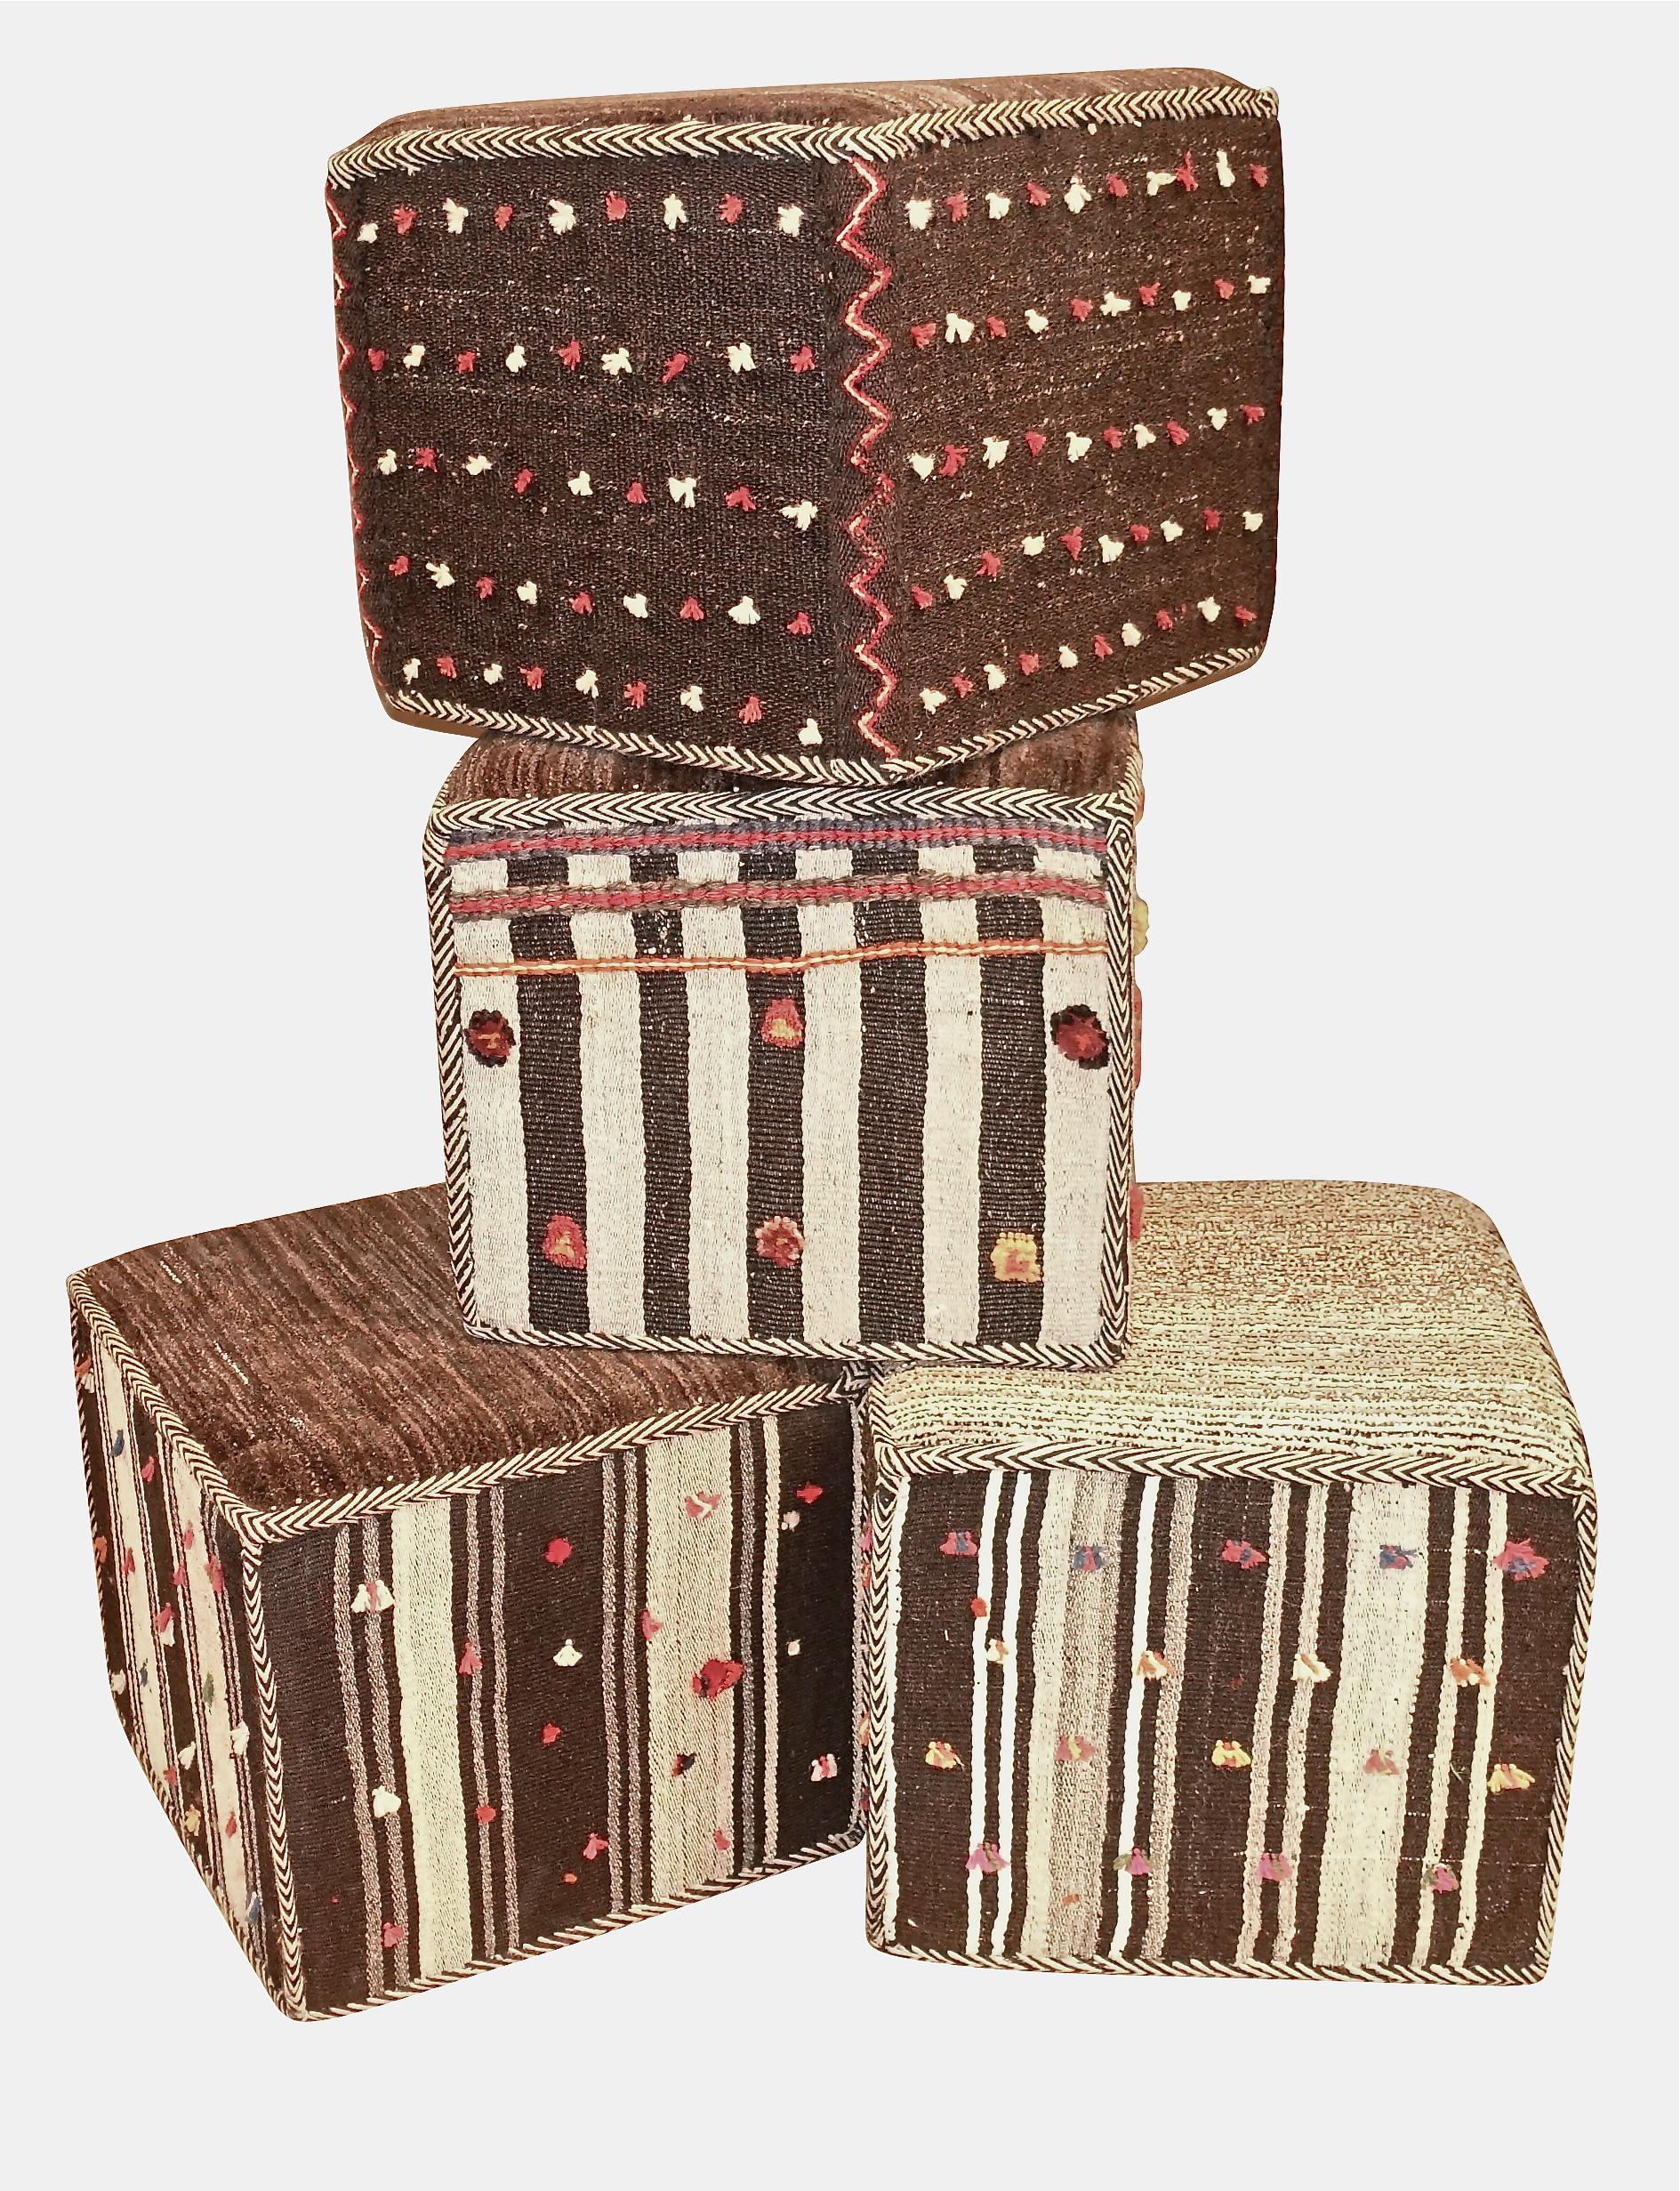 Decorative Kilim Footstool, Middle East, Contemporary 1